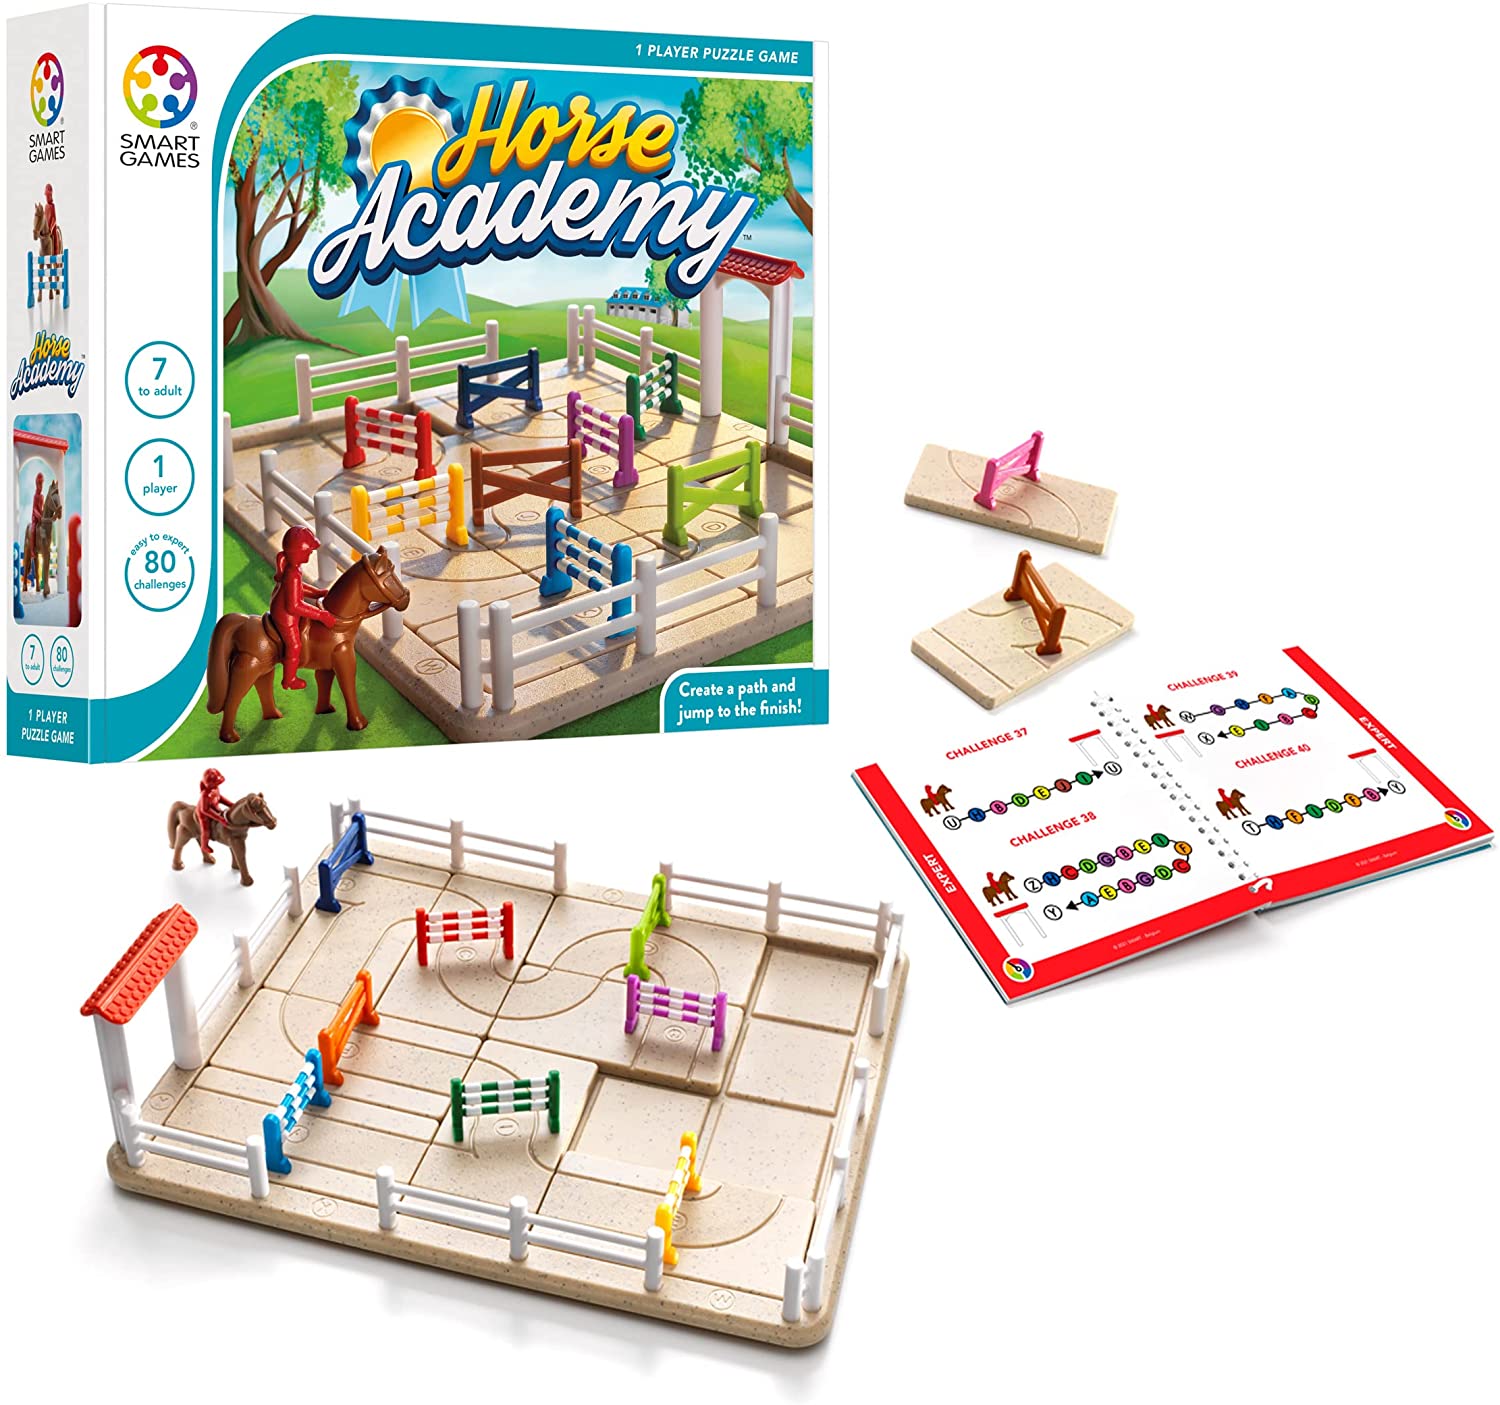 Horse Academy Puzzle Game